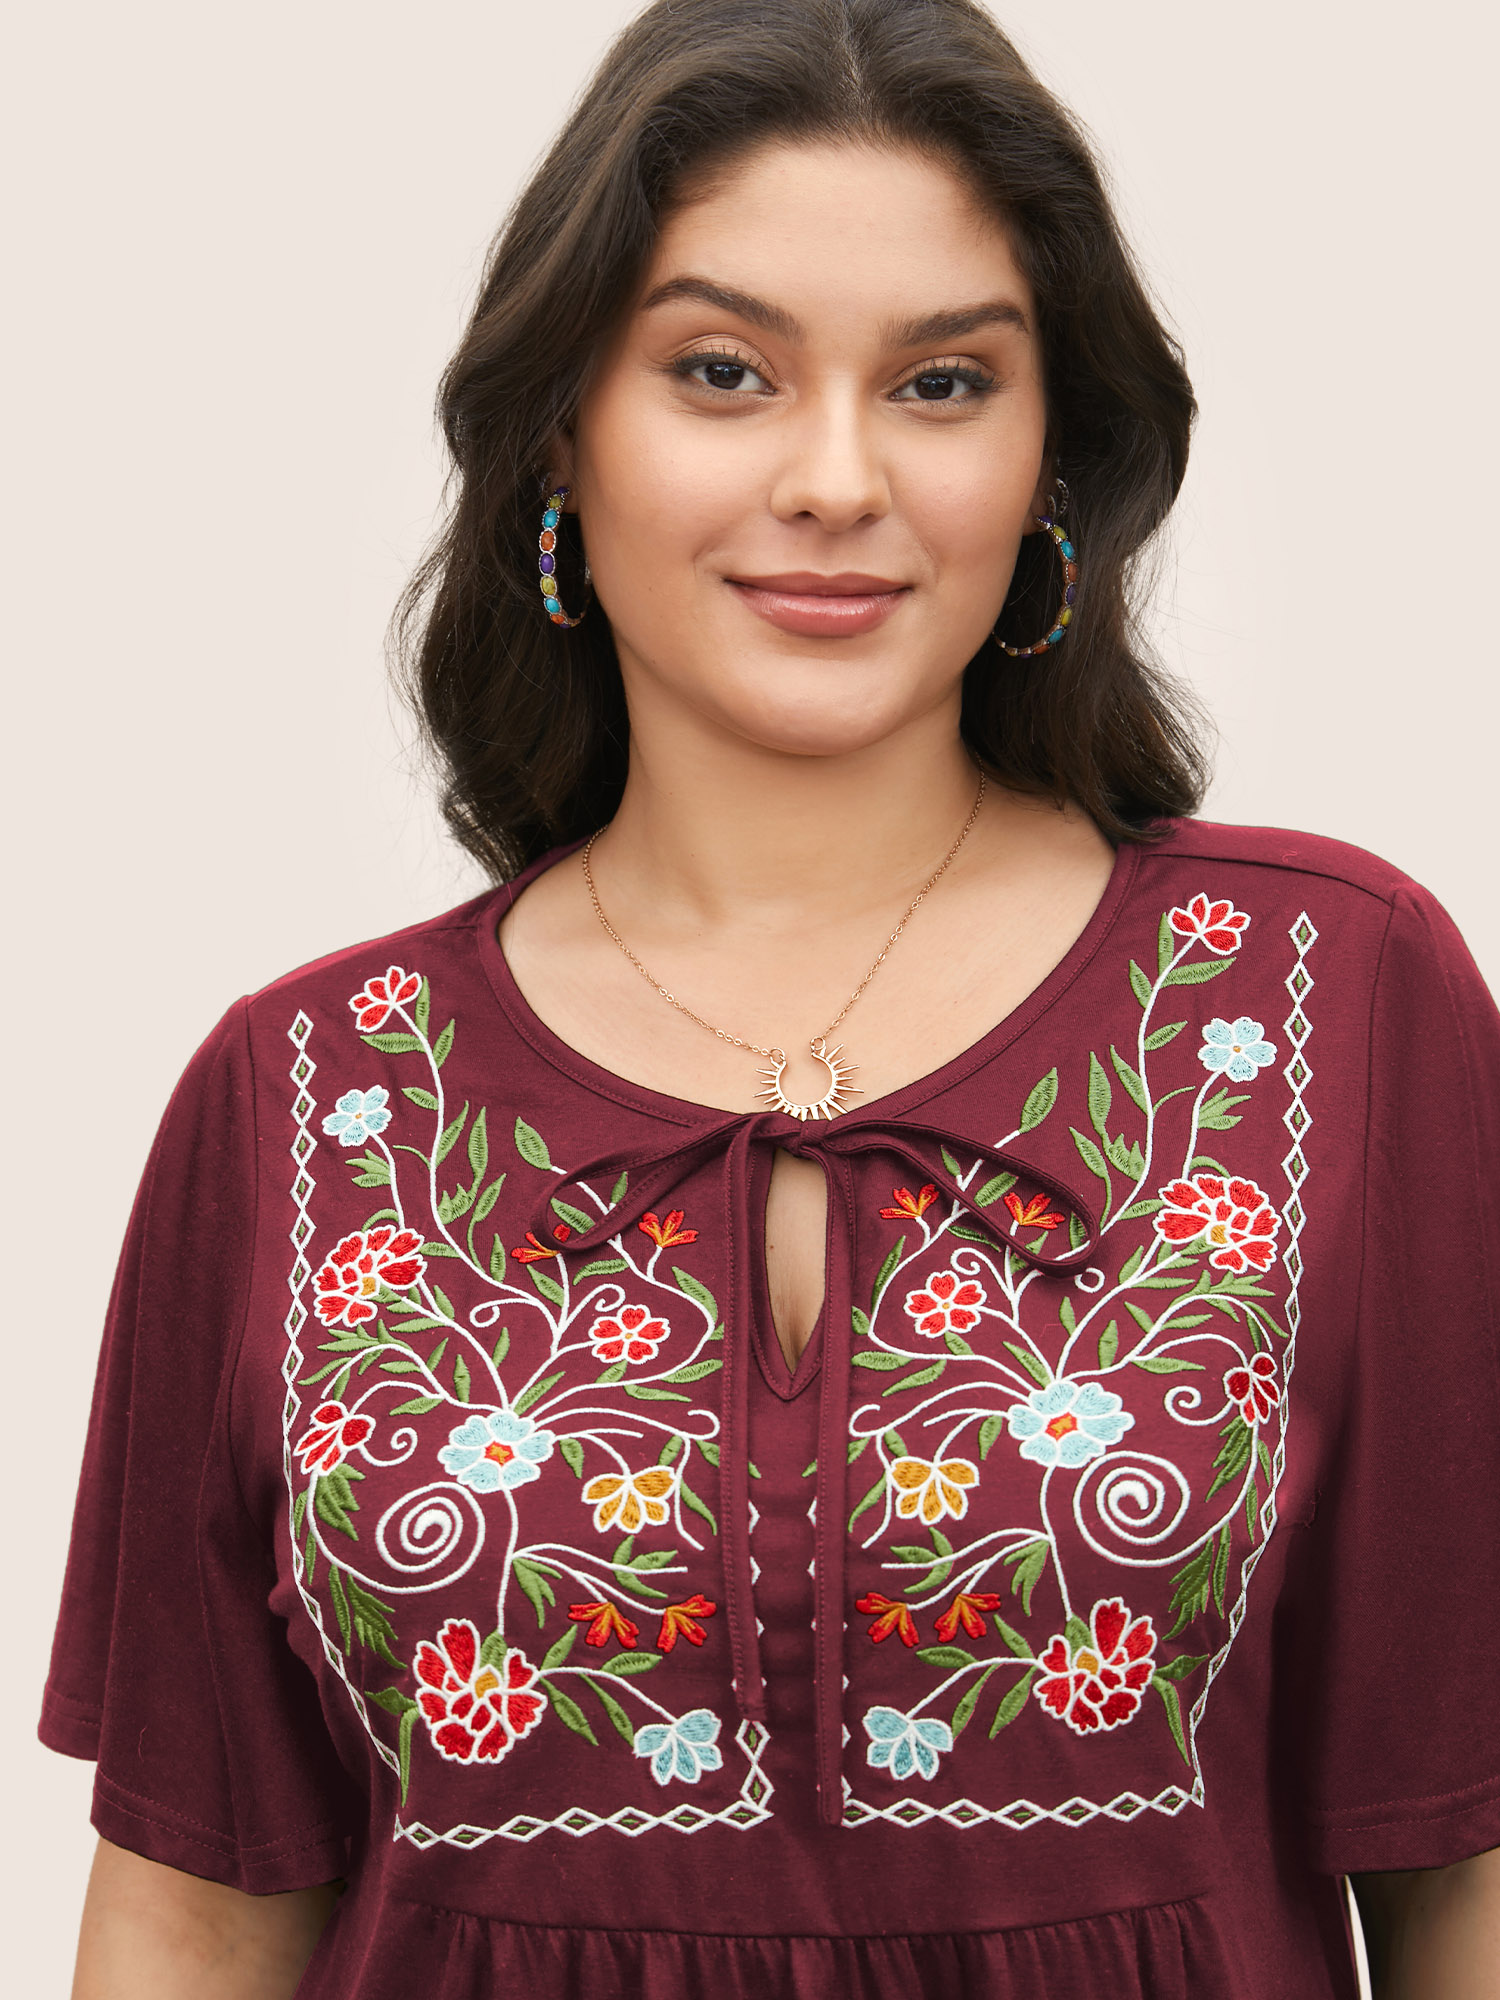 

Plus Size Floral Embroidered Tie Knot Gathered T-shirt Burgundy Women Resort Tie knot Heart neckline Vacation T-shirts BloomChic